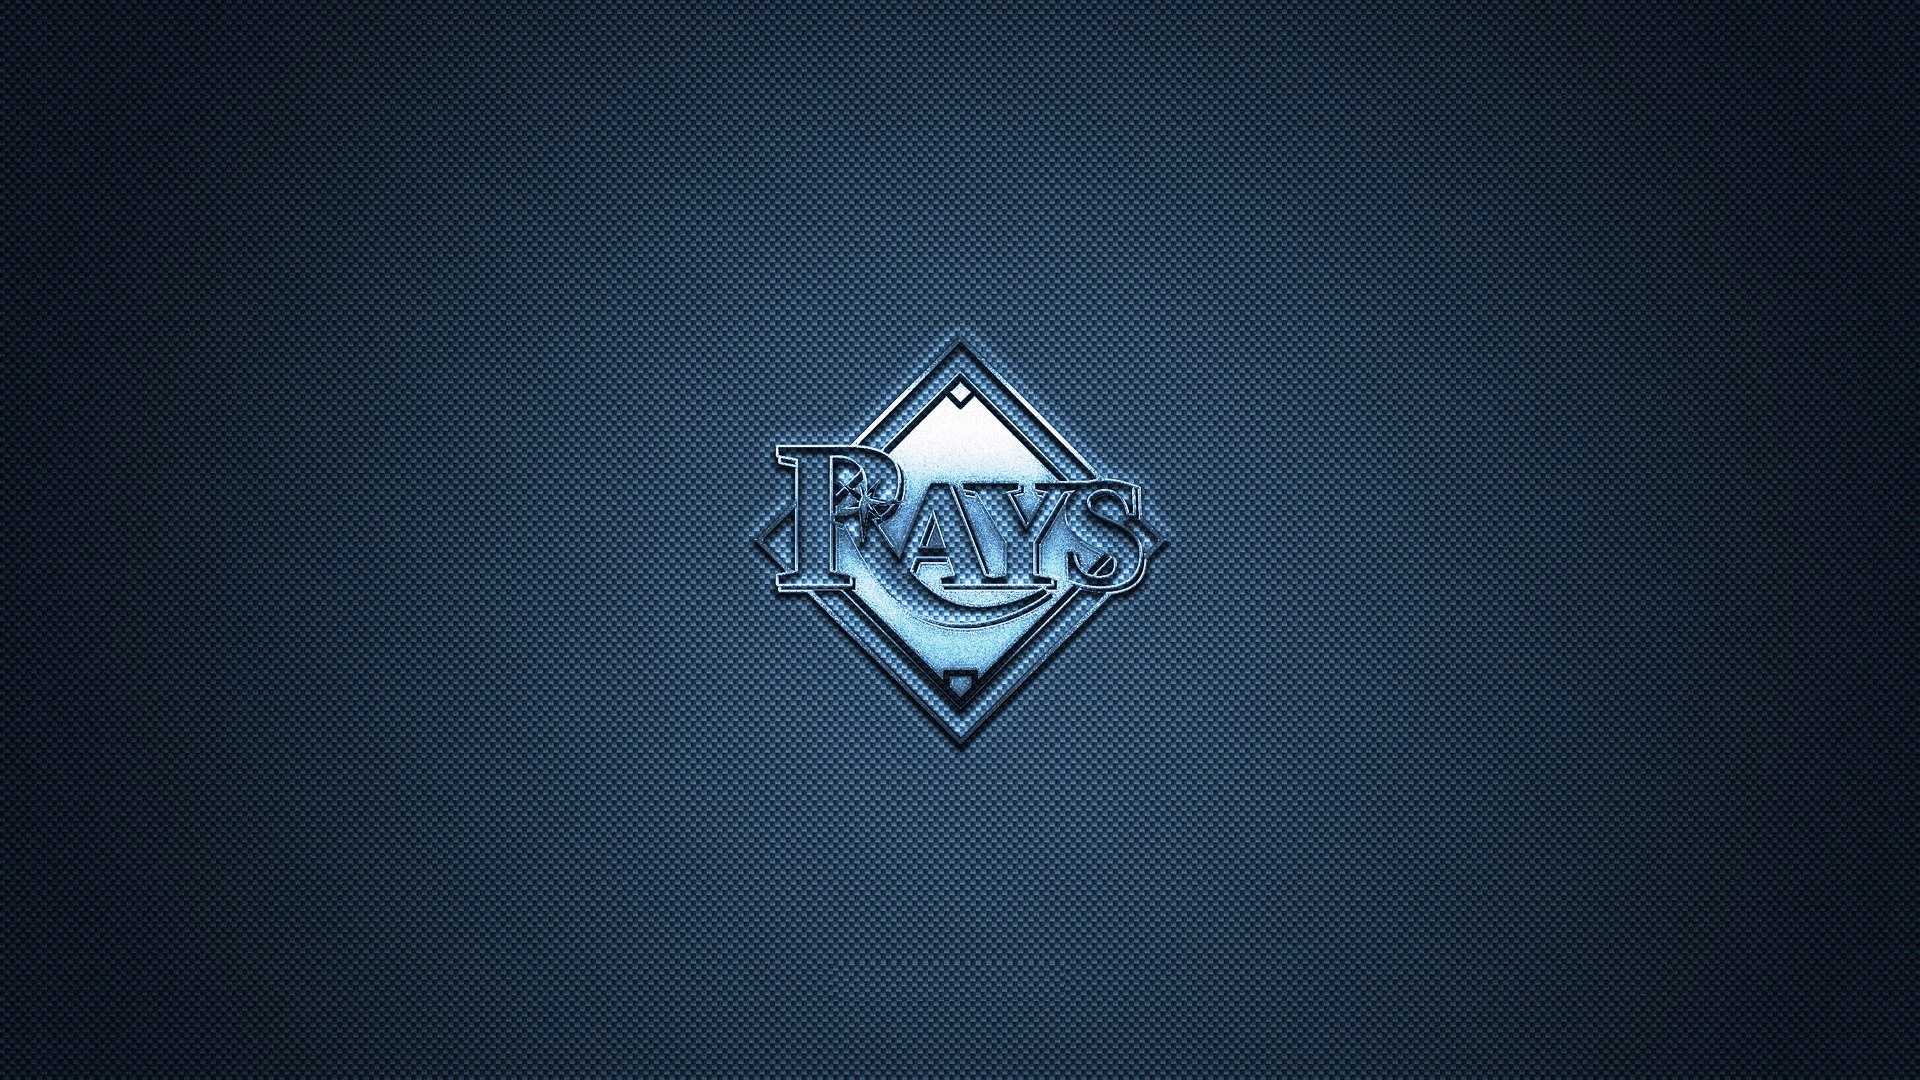 HD Backgrounds Tampa Bay Rays with high-resolution 1920x1080 pixel. You can use this wallpaper for Mac Desktop Wallpaper, Laptop Screensavers, Android Wallpapers, Tablet or iPhone Home Screen and another mobile phone device